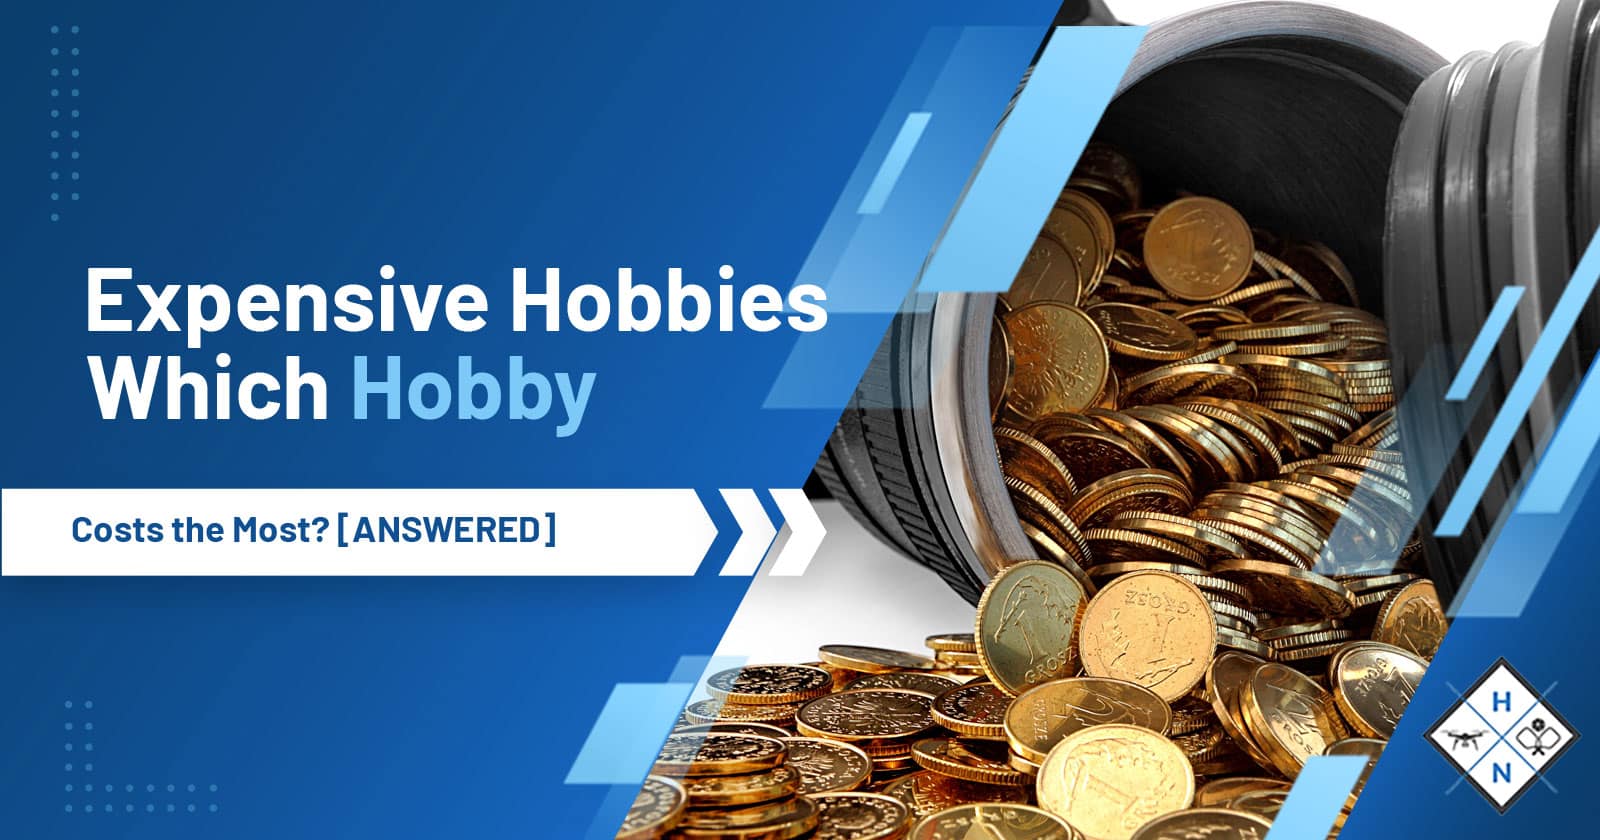 Expensive Hobbies – Which Hobby Costs the Most? [ANSWERED]